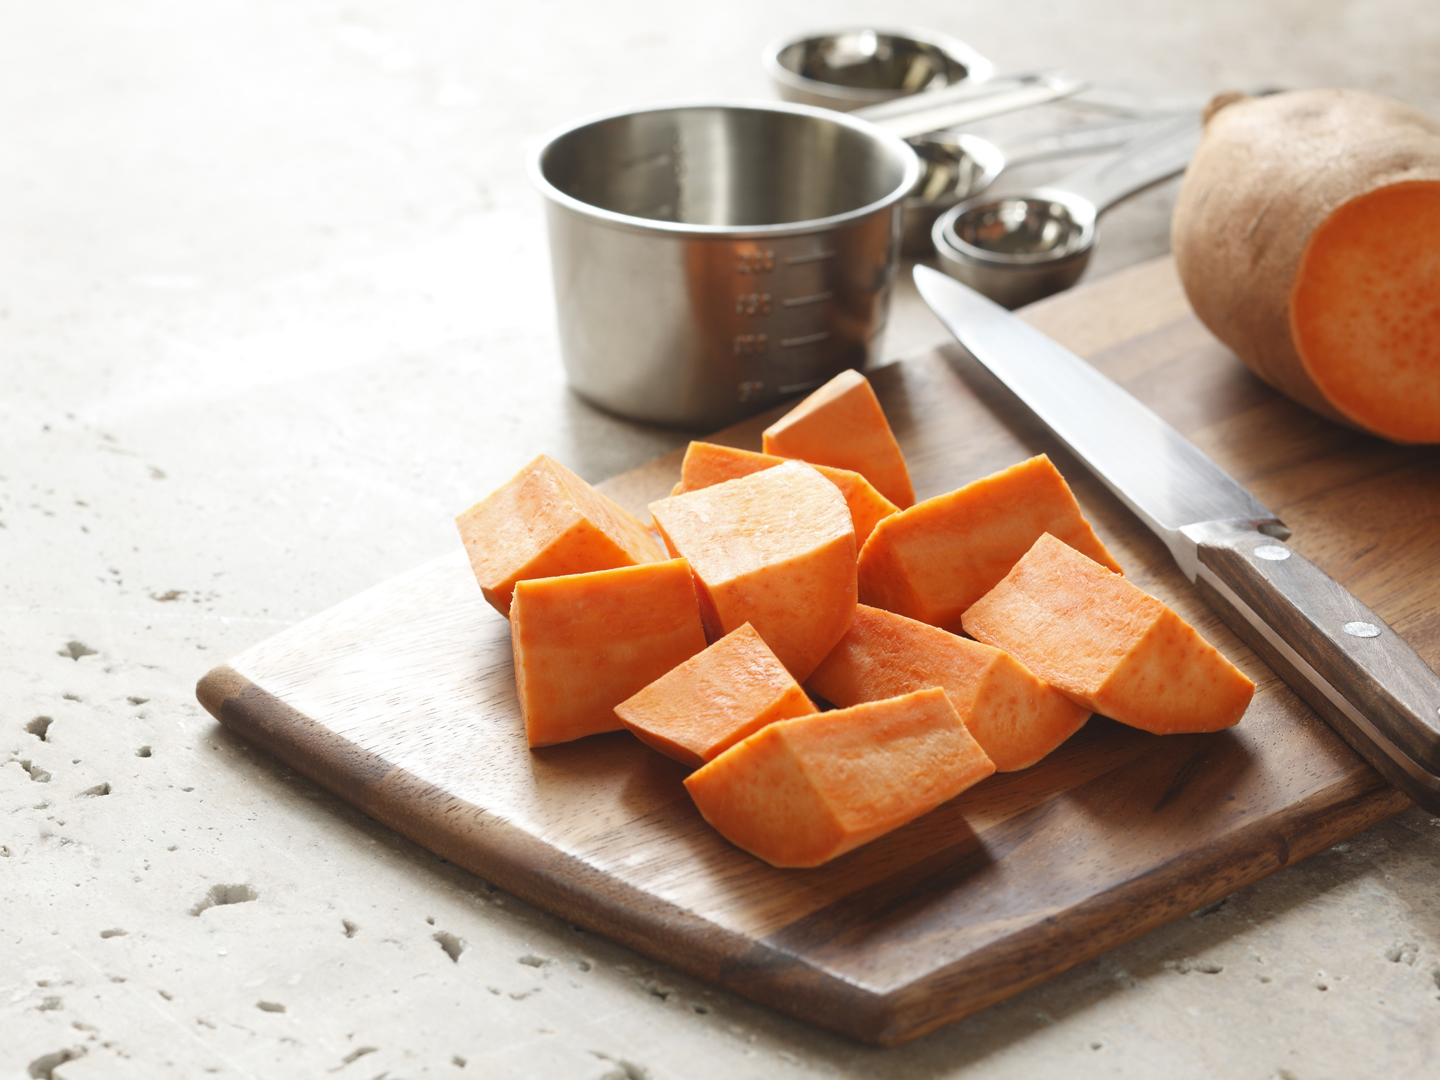 https://www.drweil.com/wp-content/uploads/2016/12/diet-nutrition_nutrition_can-you-live-on-sweet-potatoes_2715x1810_000025291744.jpg